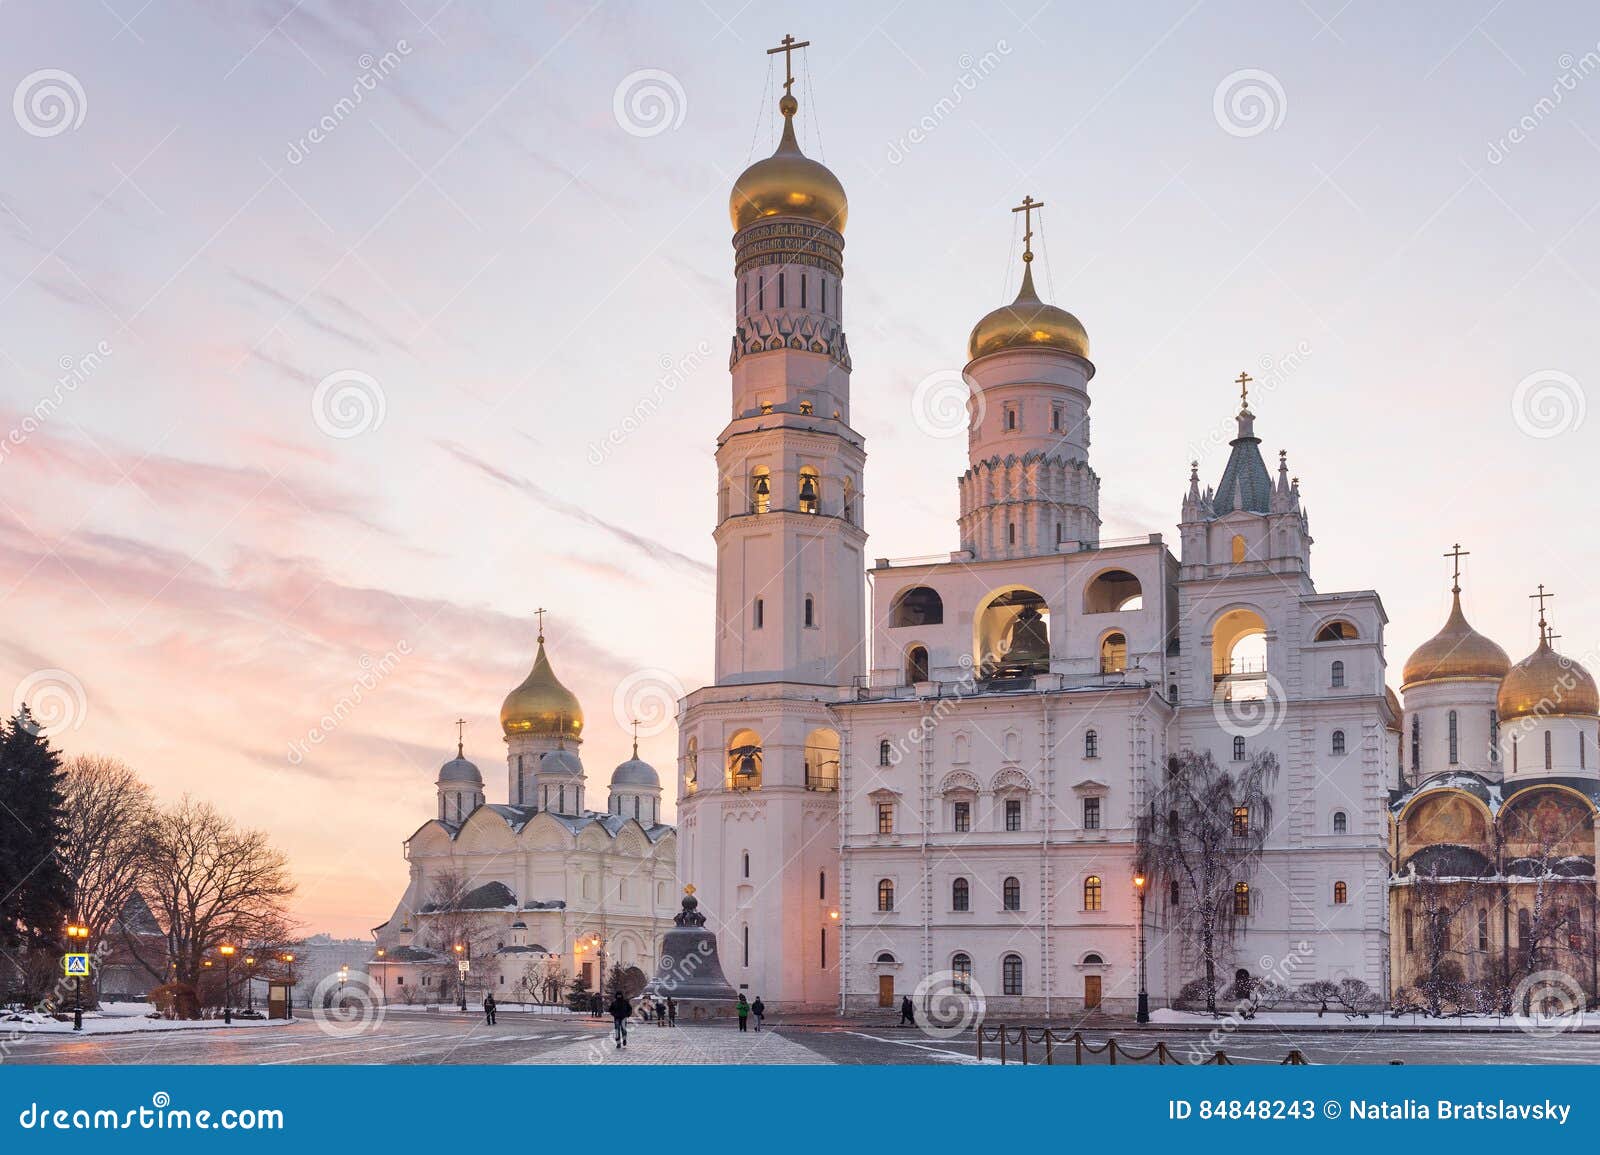 moscow kremlin cathedrals at sunset